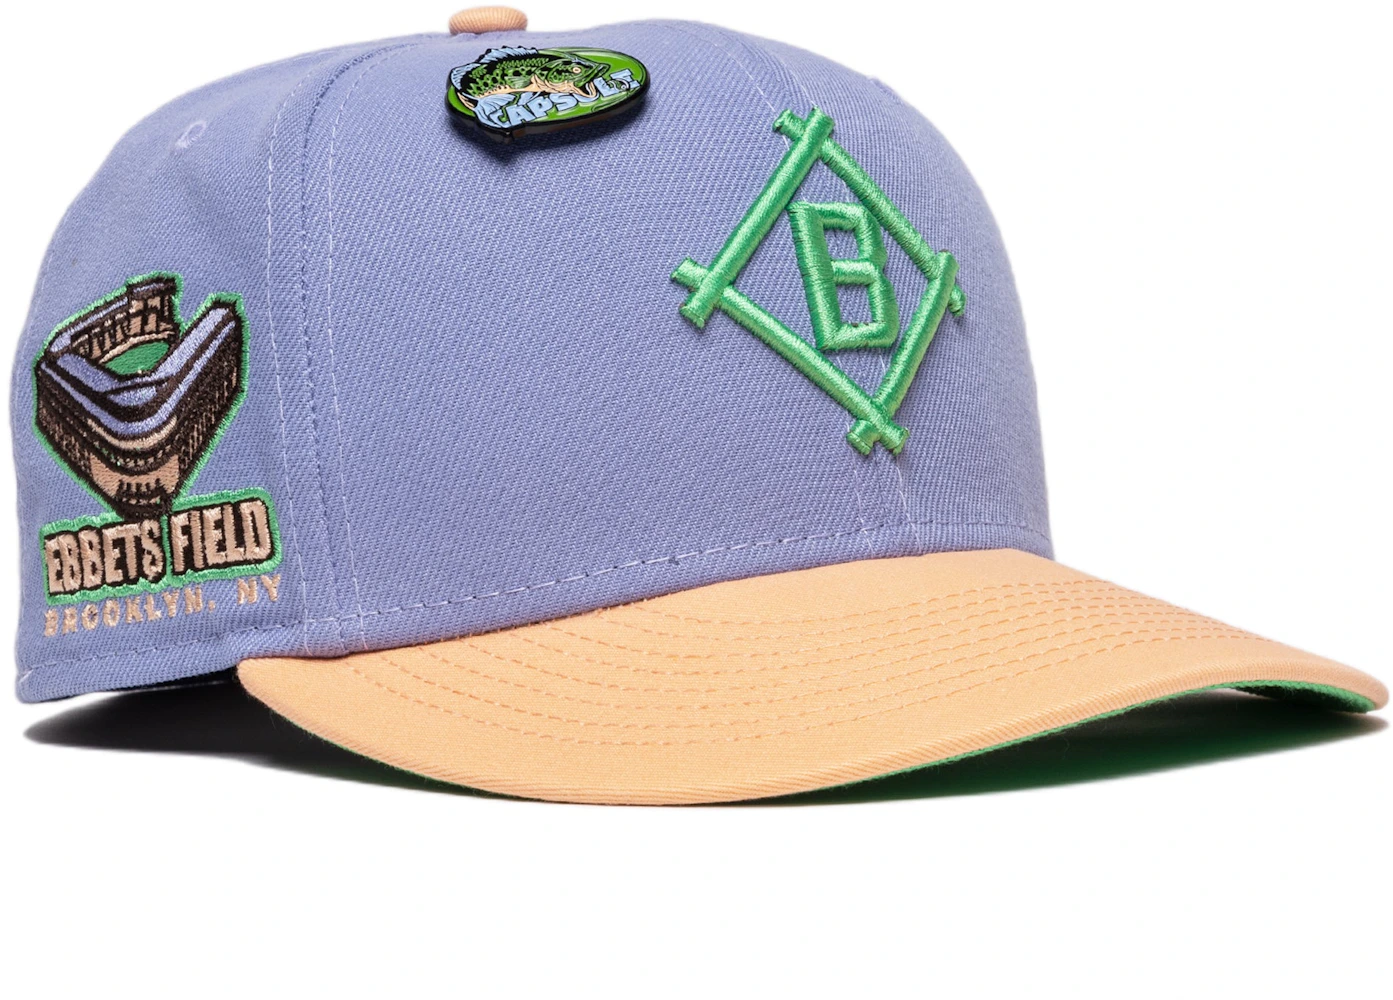 Brooklyn Dodgers New Era Cooperstown Collection Ebbets Field Patch